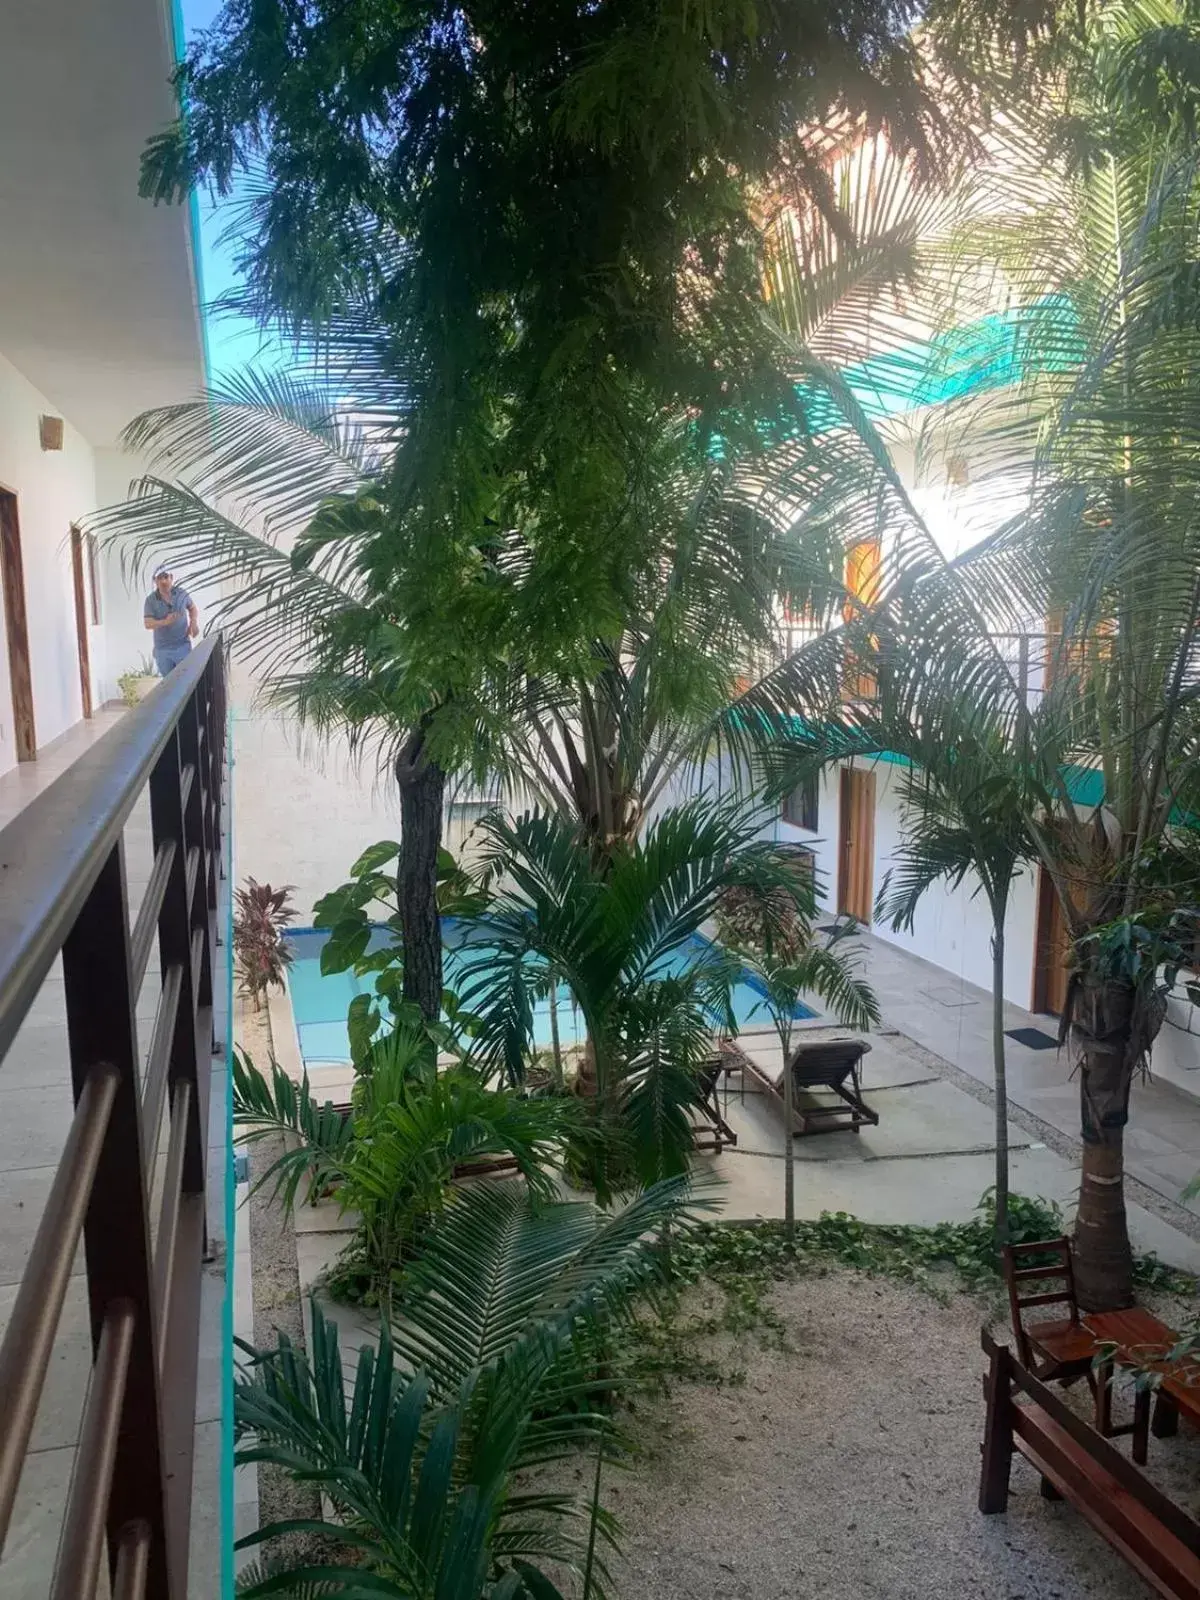 Property building, Pool View in Los Arcos Hotel - TULUM